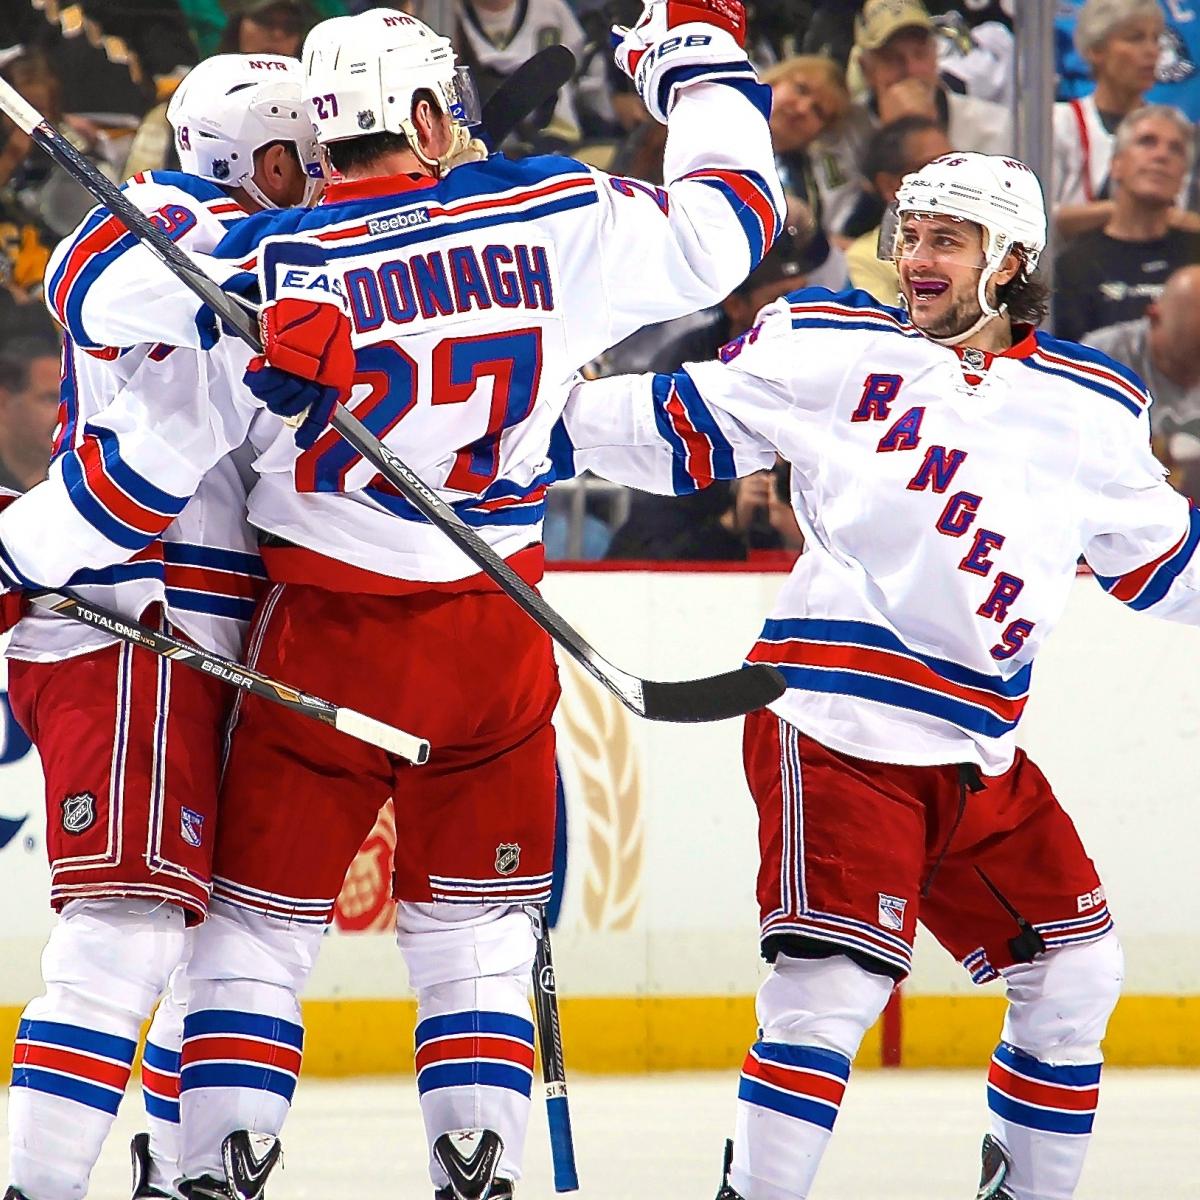 Rangers vs. Penguins Game 5 Score and Twitter Reaction from 2014 NHL